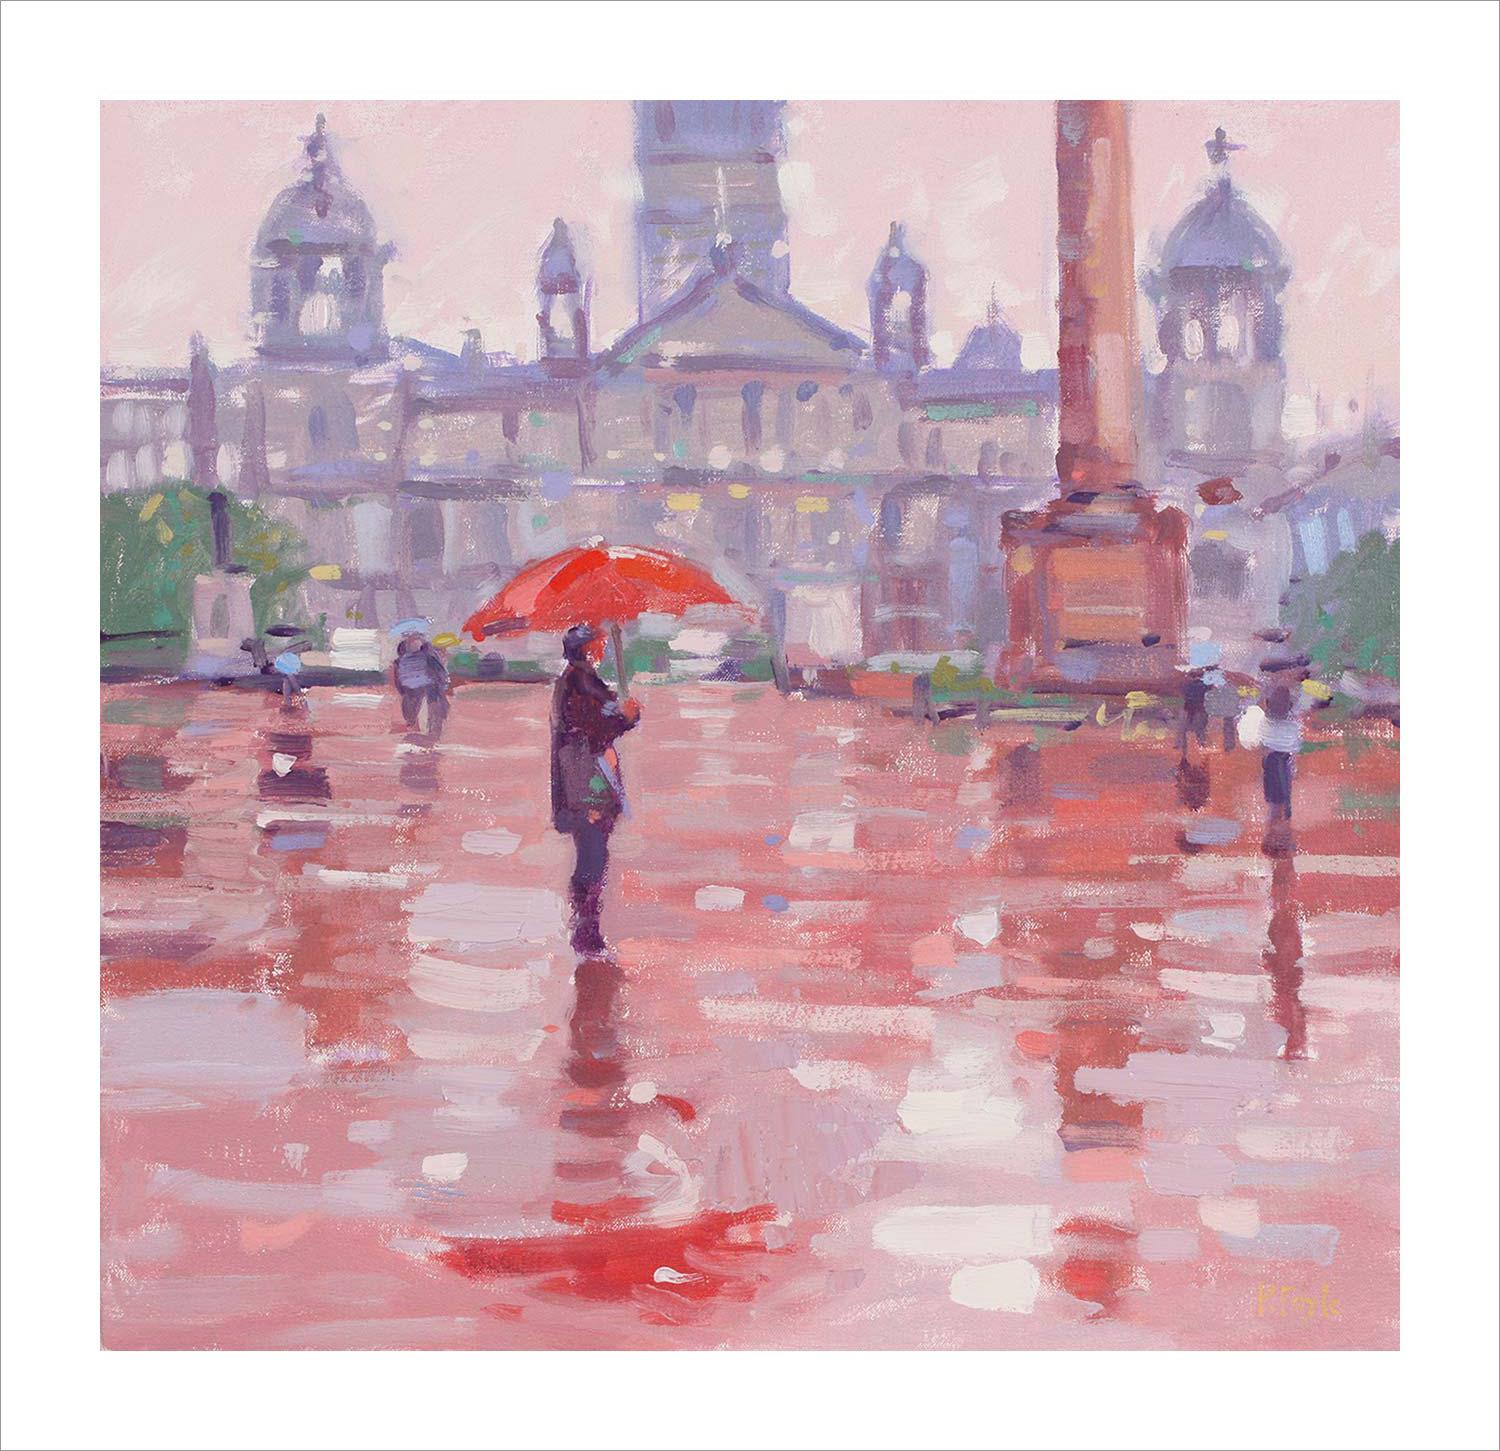 George Square Art Print from an original painting by artist Peter Foyle